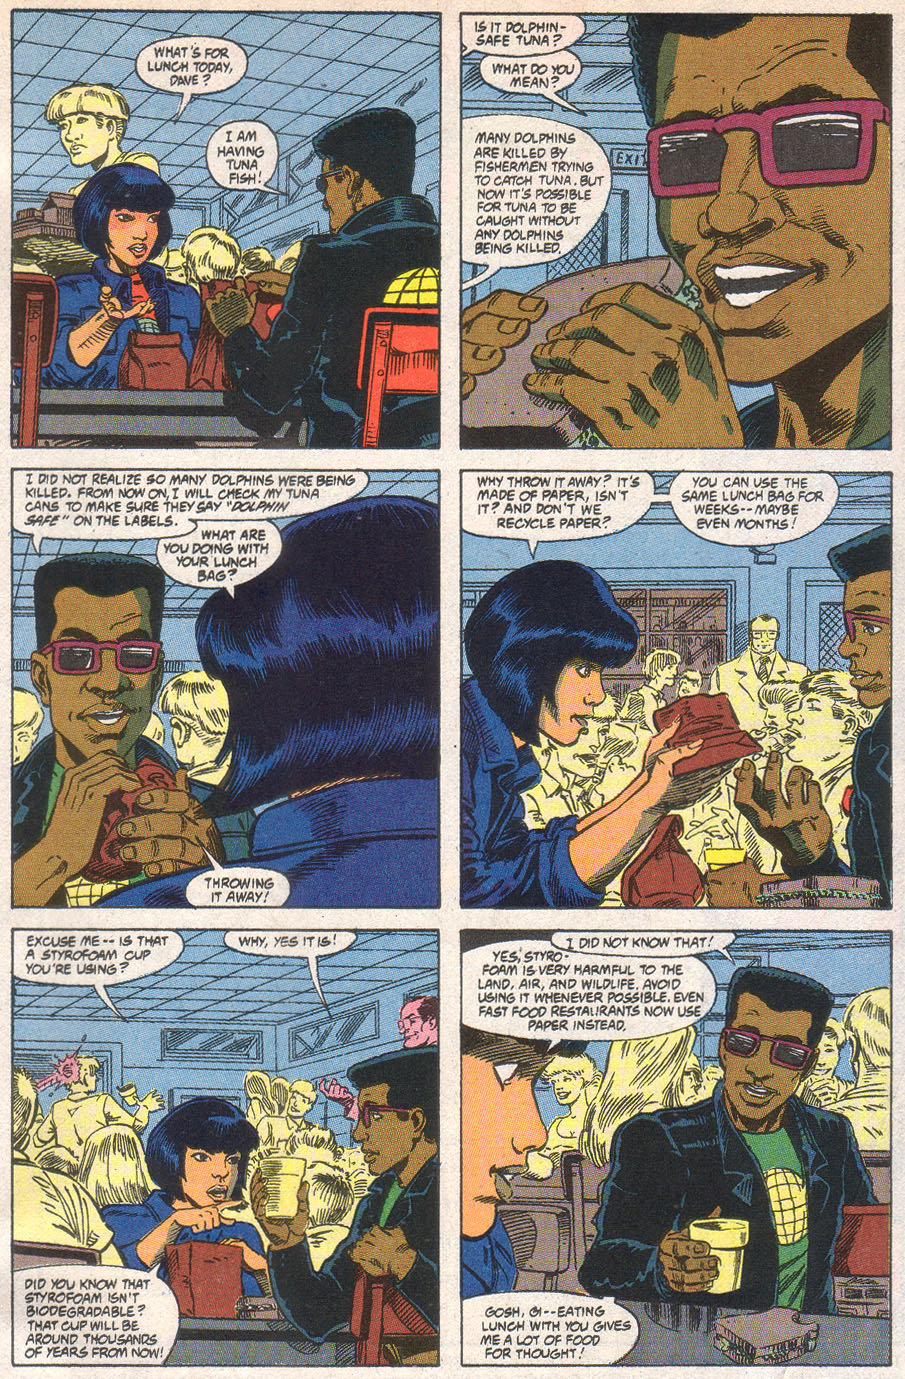 Captain Planet and the Planeteers 4 Page 32